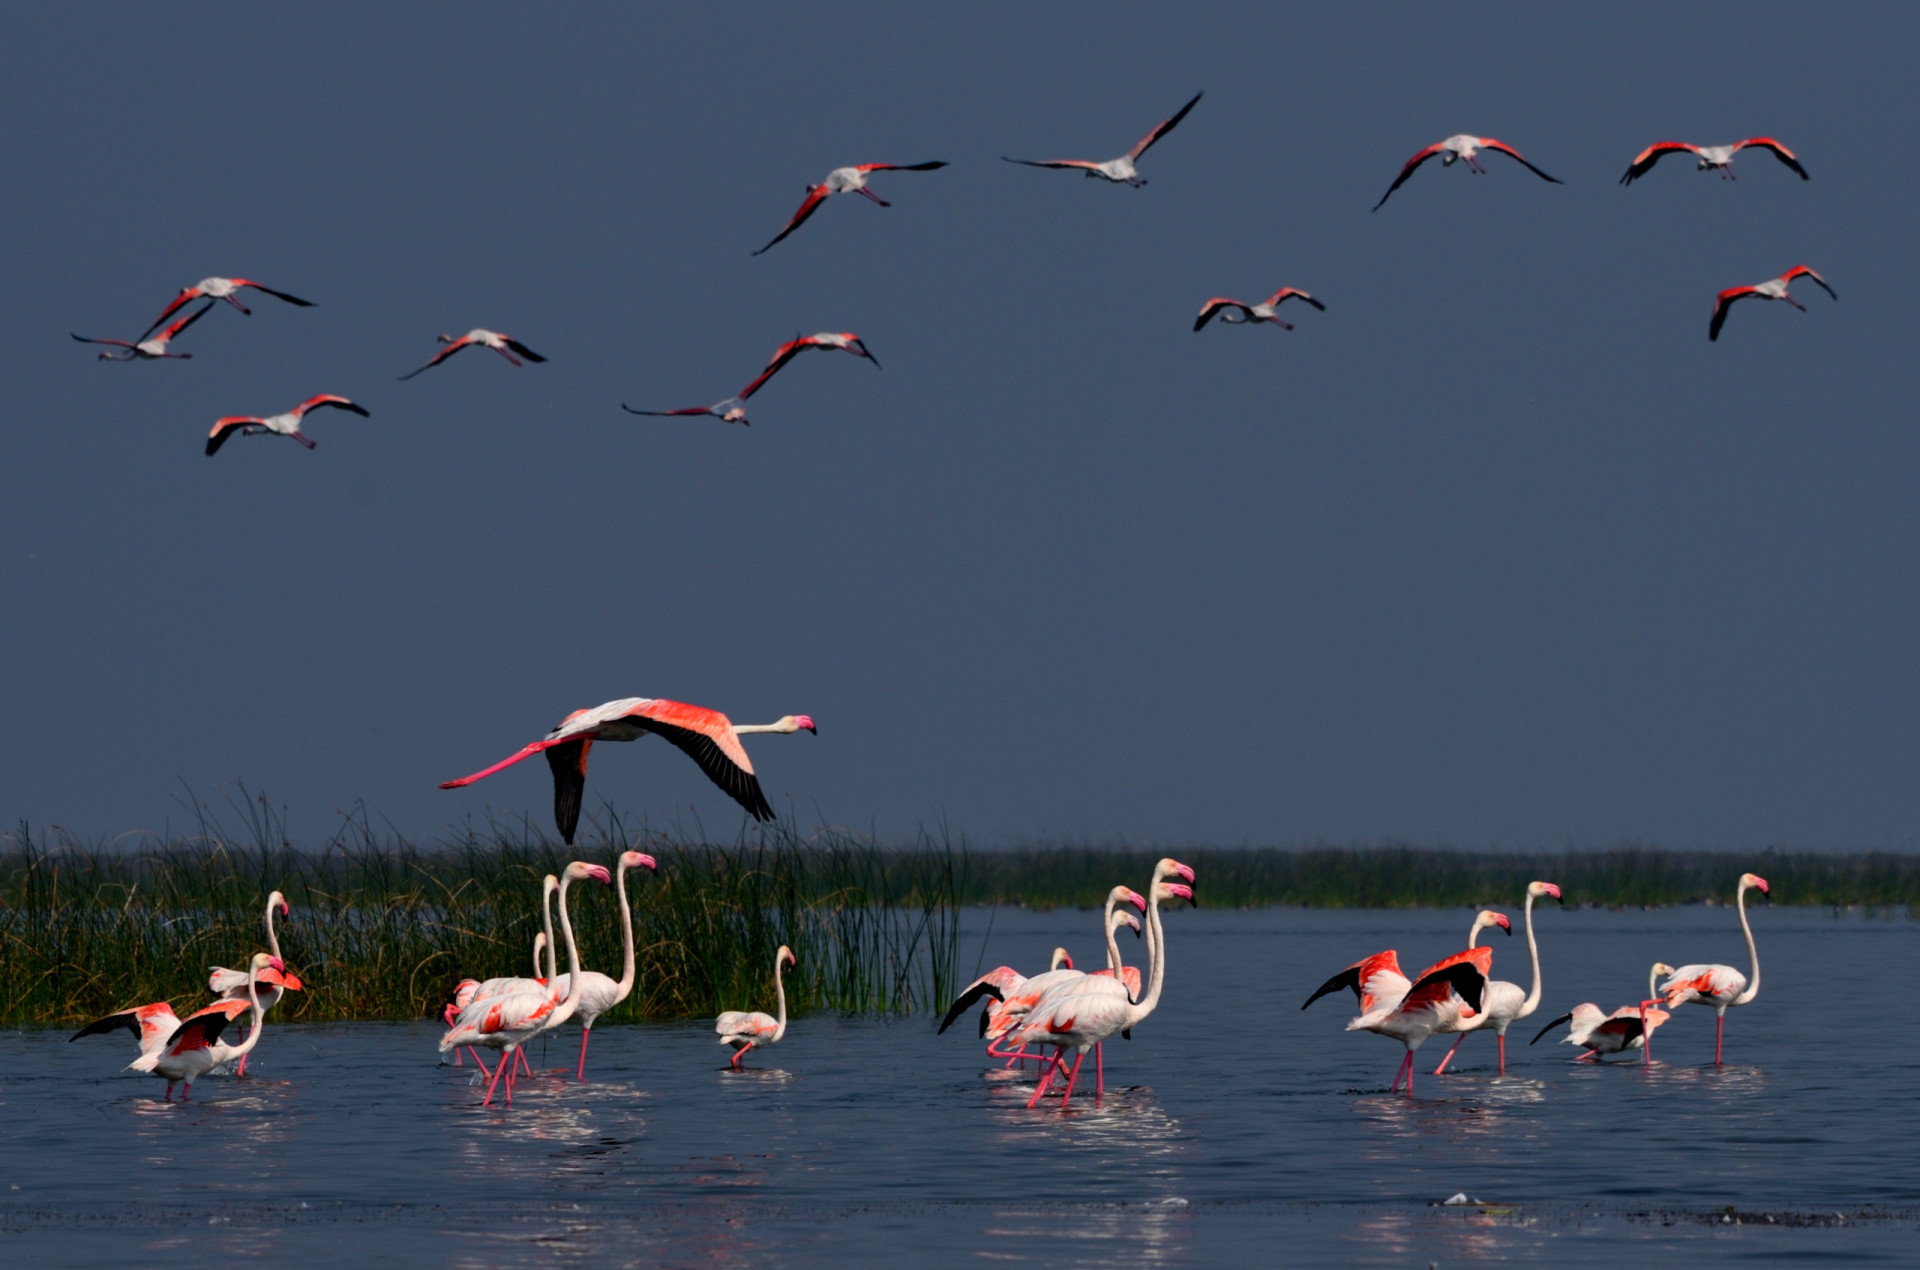 <p>The whole of Nalbana Island is a designated bird sanctuary and attracts ornithologists in their hundreds, who flock to Odisha to catch a glimpse of rare species like the spoon-billed sandpiper and Pallas's fish eagle.</p><p><a href="https://www.msn.com/en-nz/community/channel/vid-7xx8mnucu55yw63we9va2gwr7uihbxwc68fxqp25x6tg4ftibpra?cvid=94631541bc0f4f89bfd59158d696ad7e">Follow us and access great exclusive content every day</a></p>